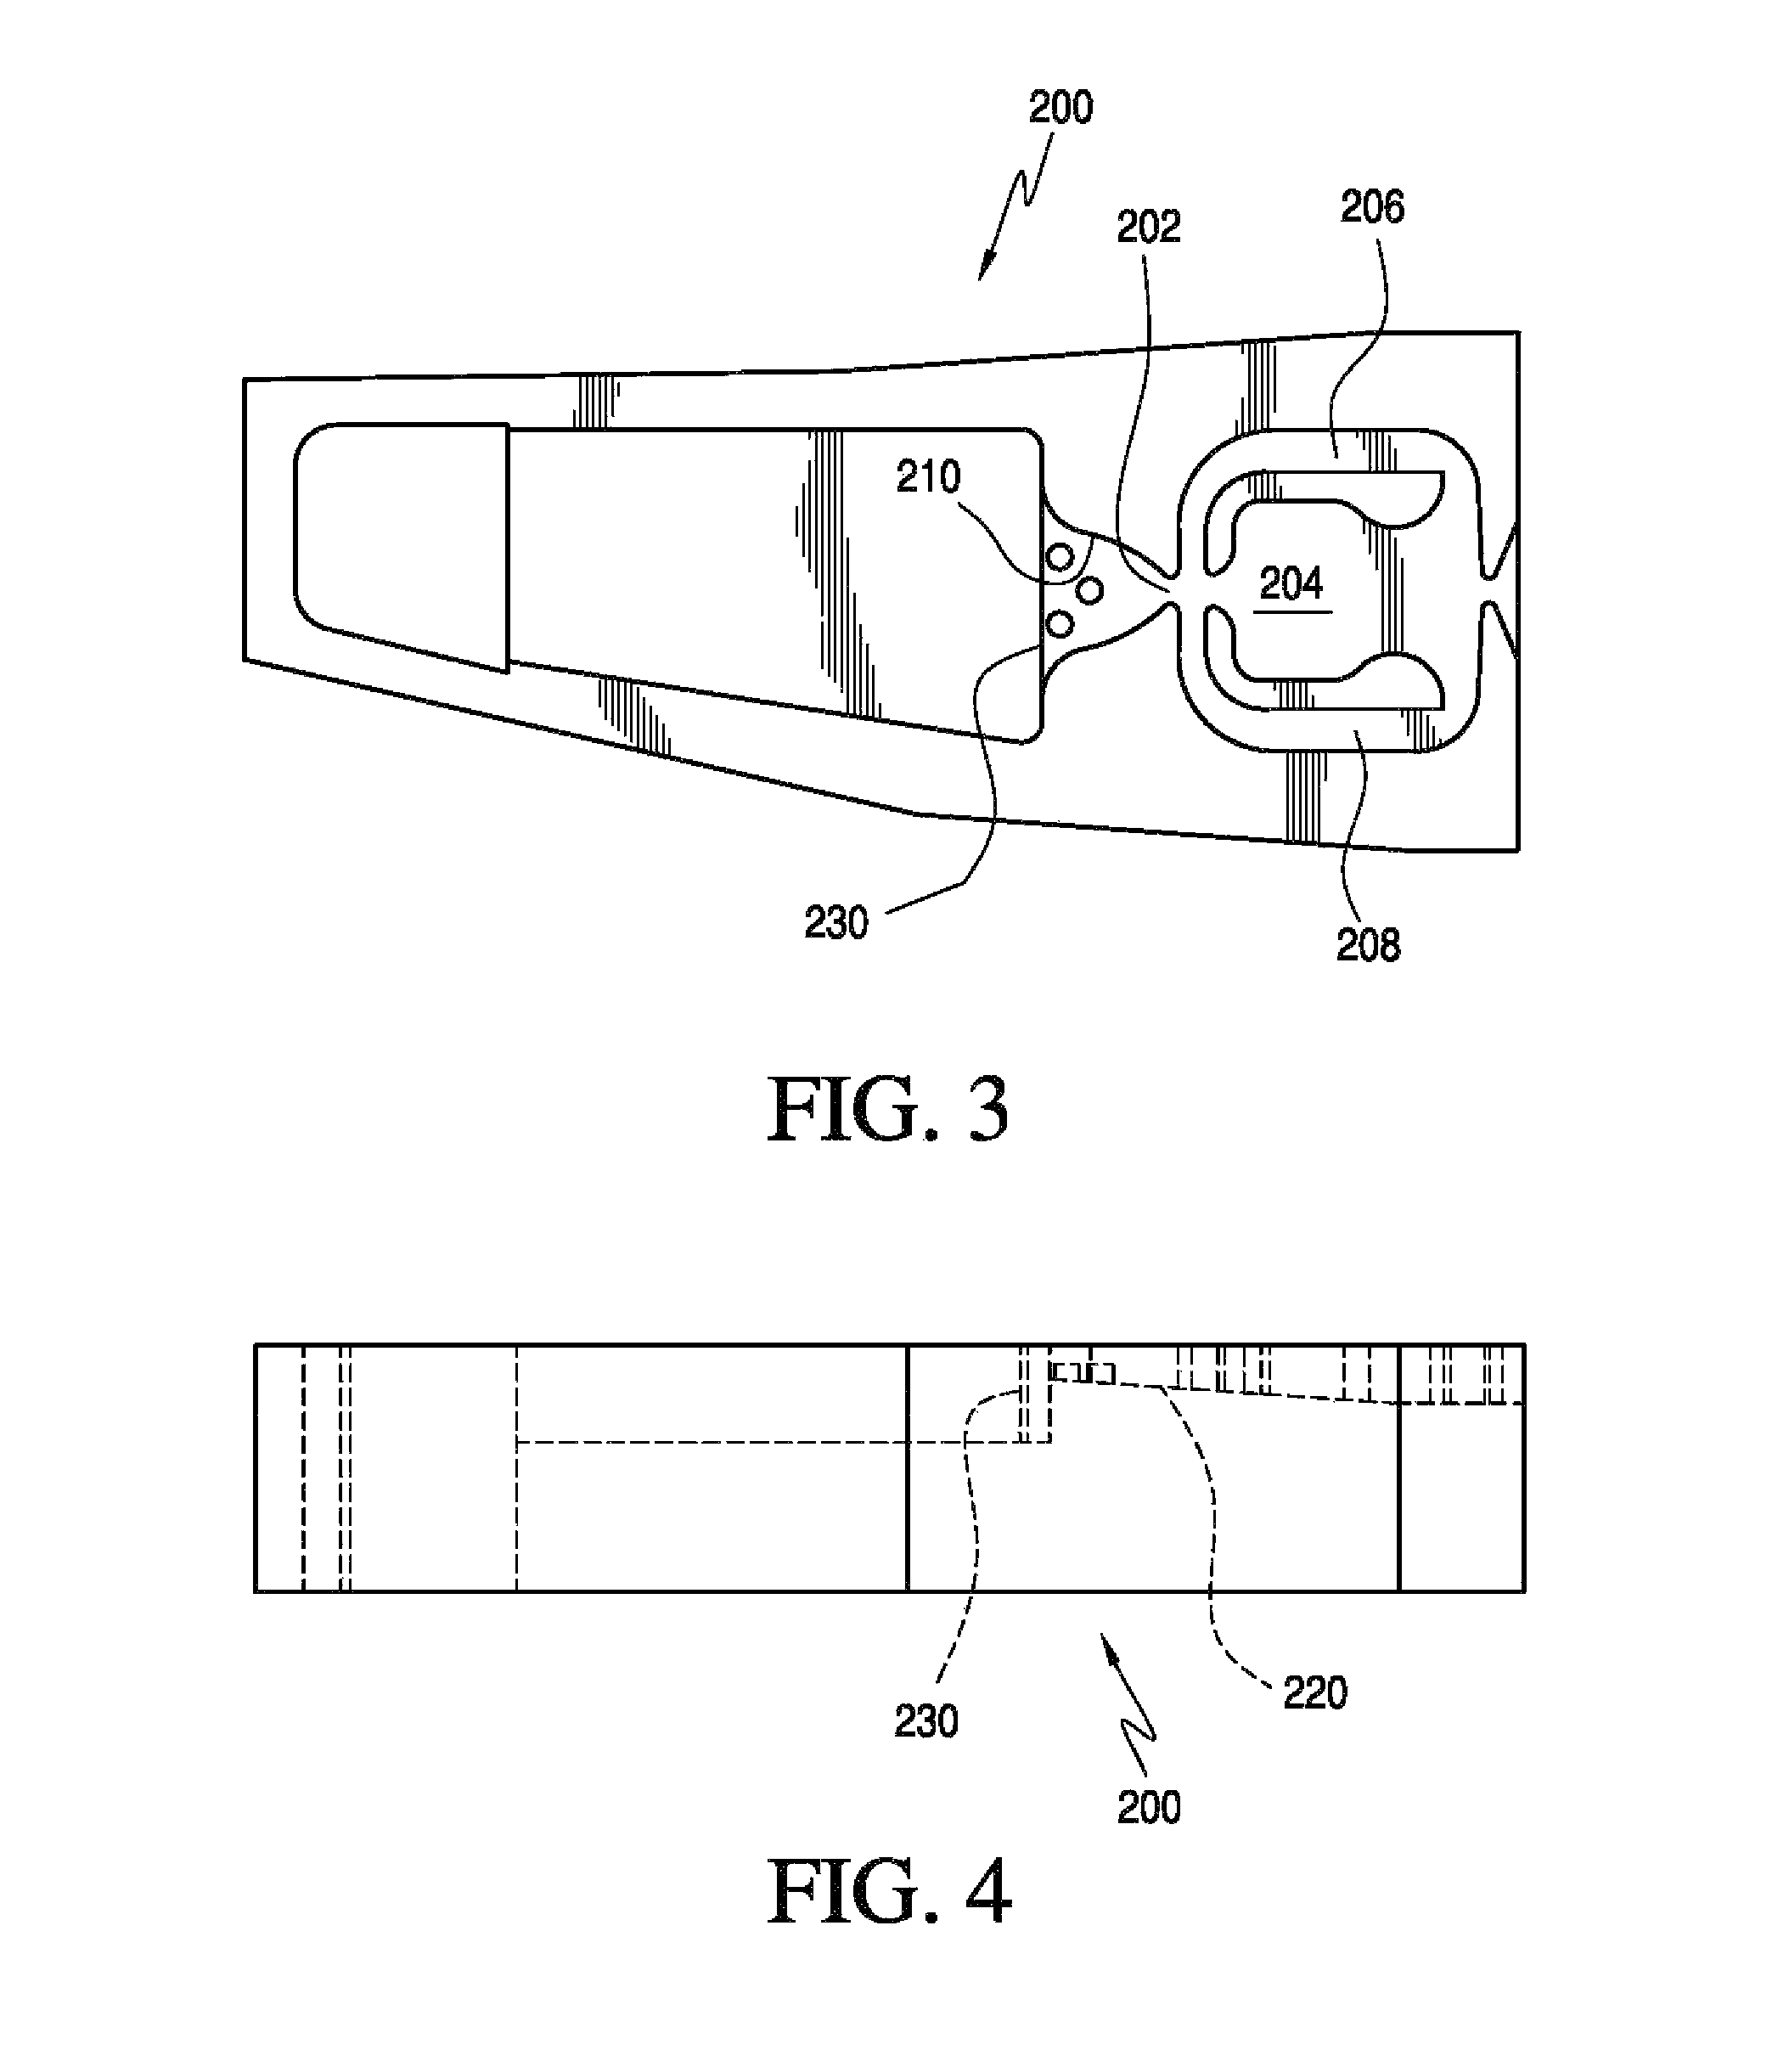 Nozzle and fluidic circuit adapted for use with cold fluids, viscous fluids or fluids under light pressure